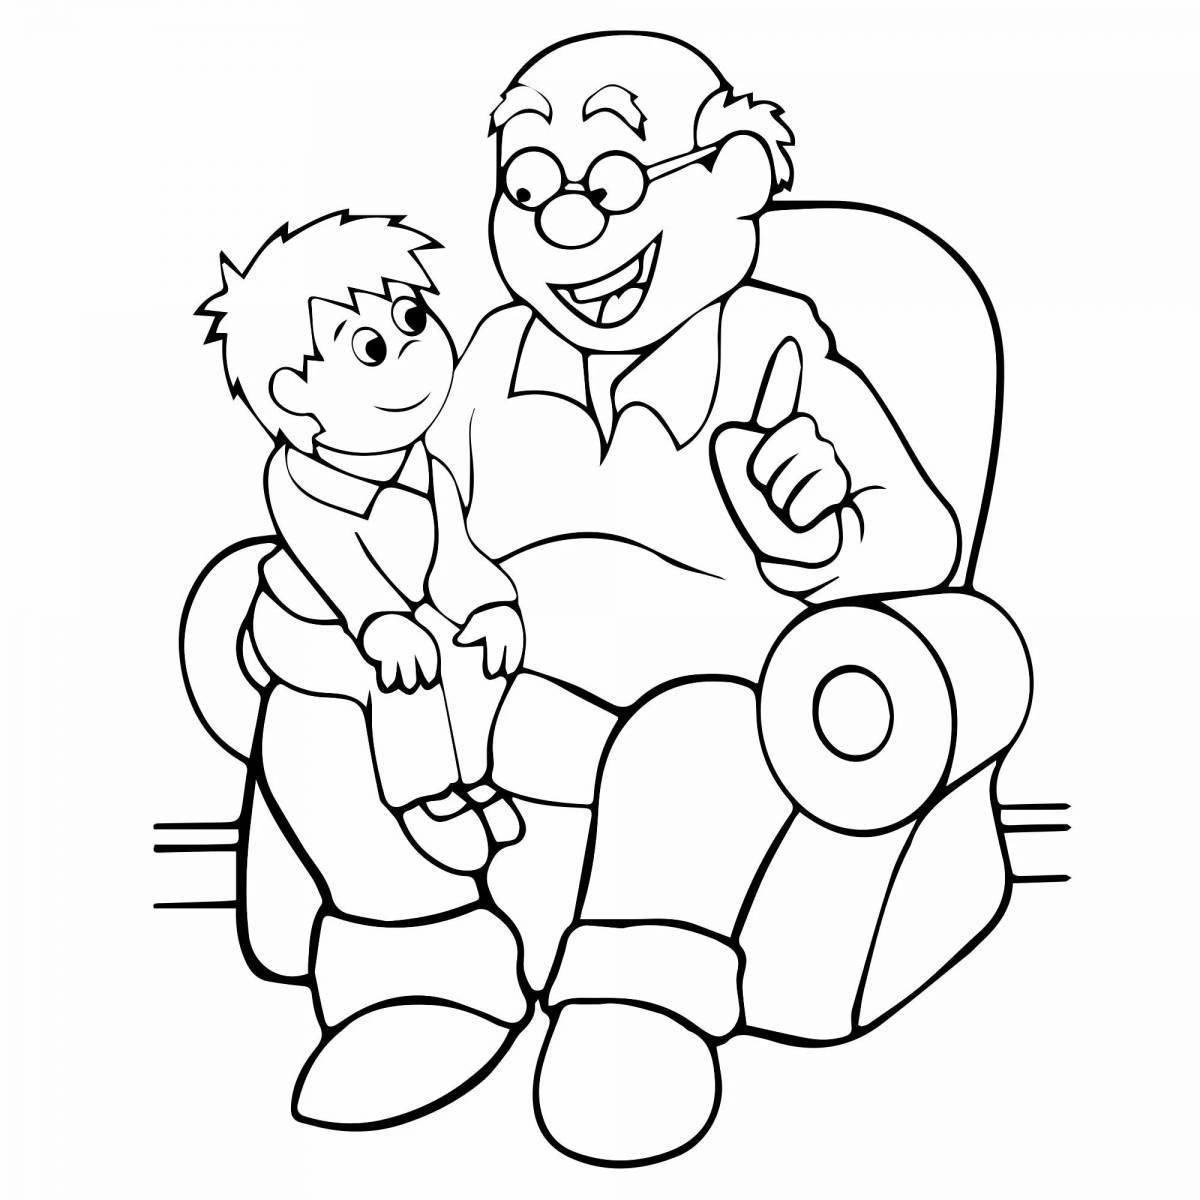 Coloring page gorgeous grandfather and granddaughter